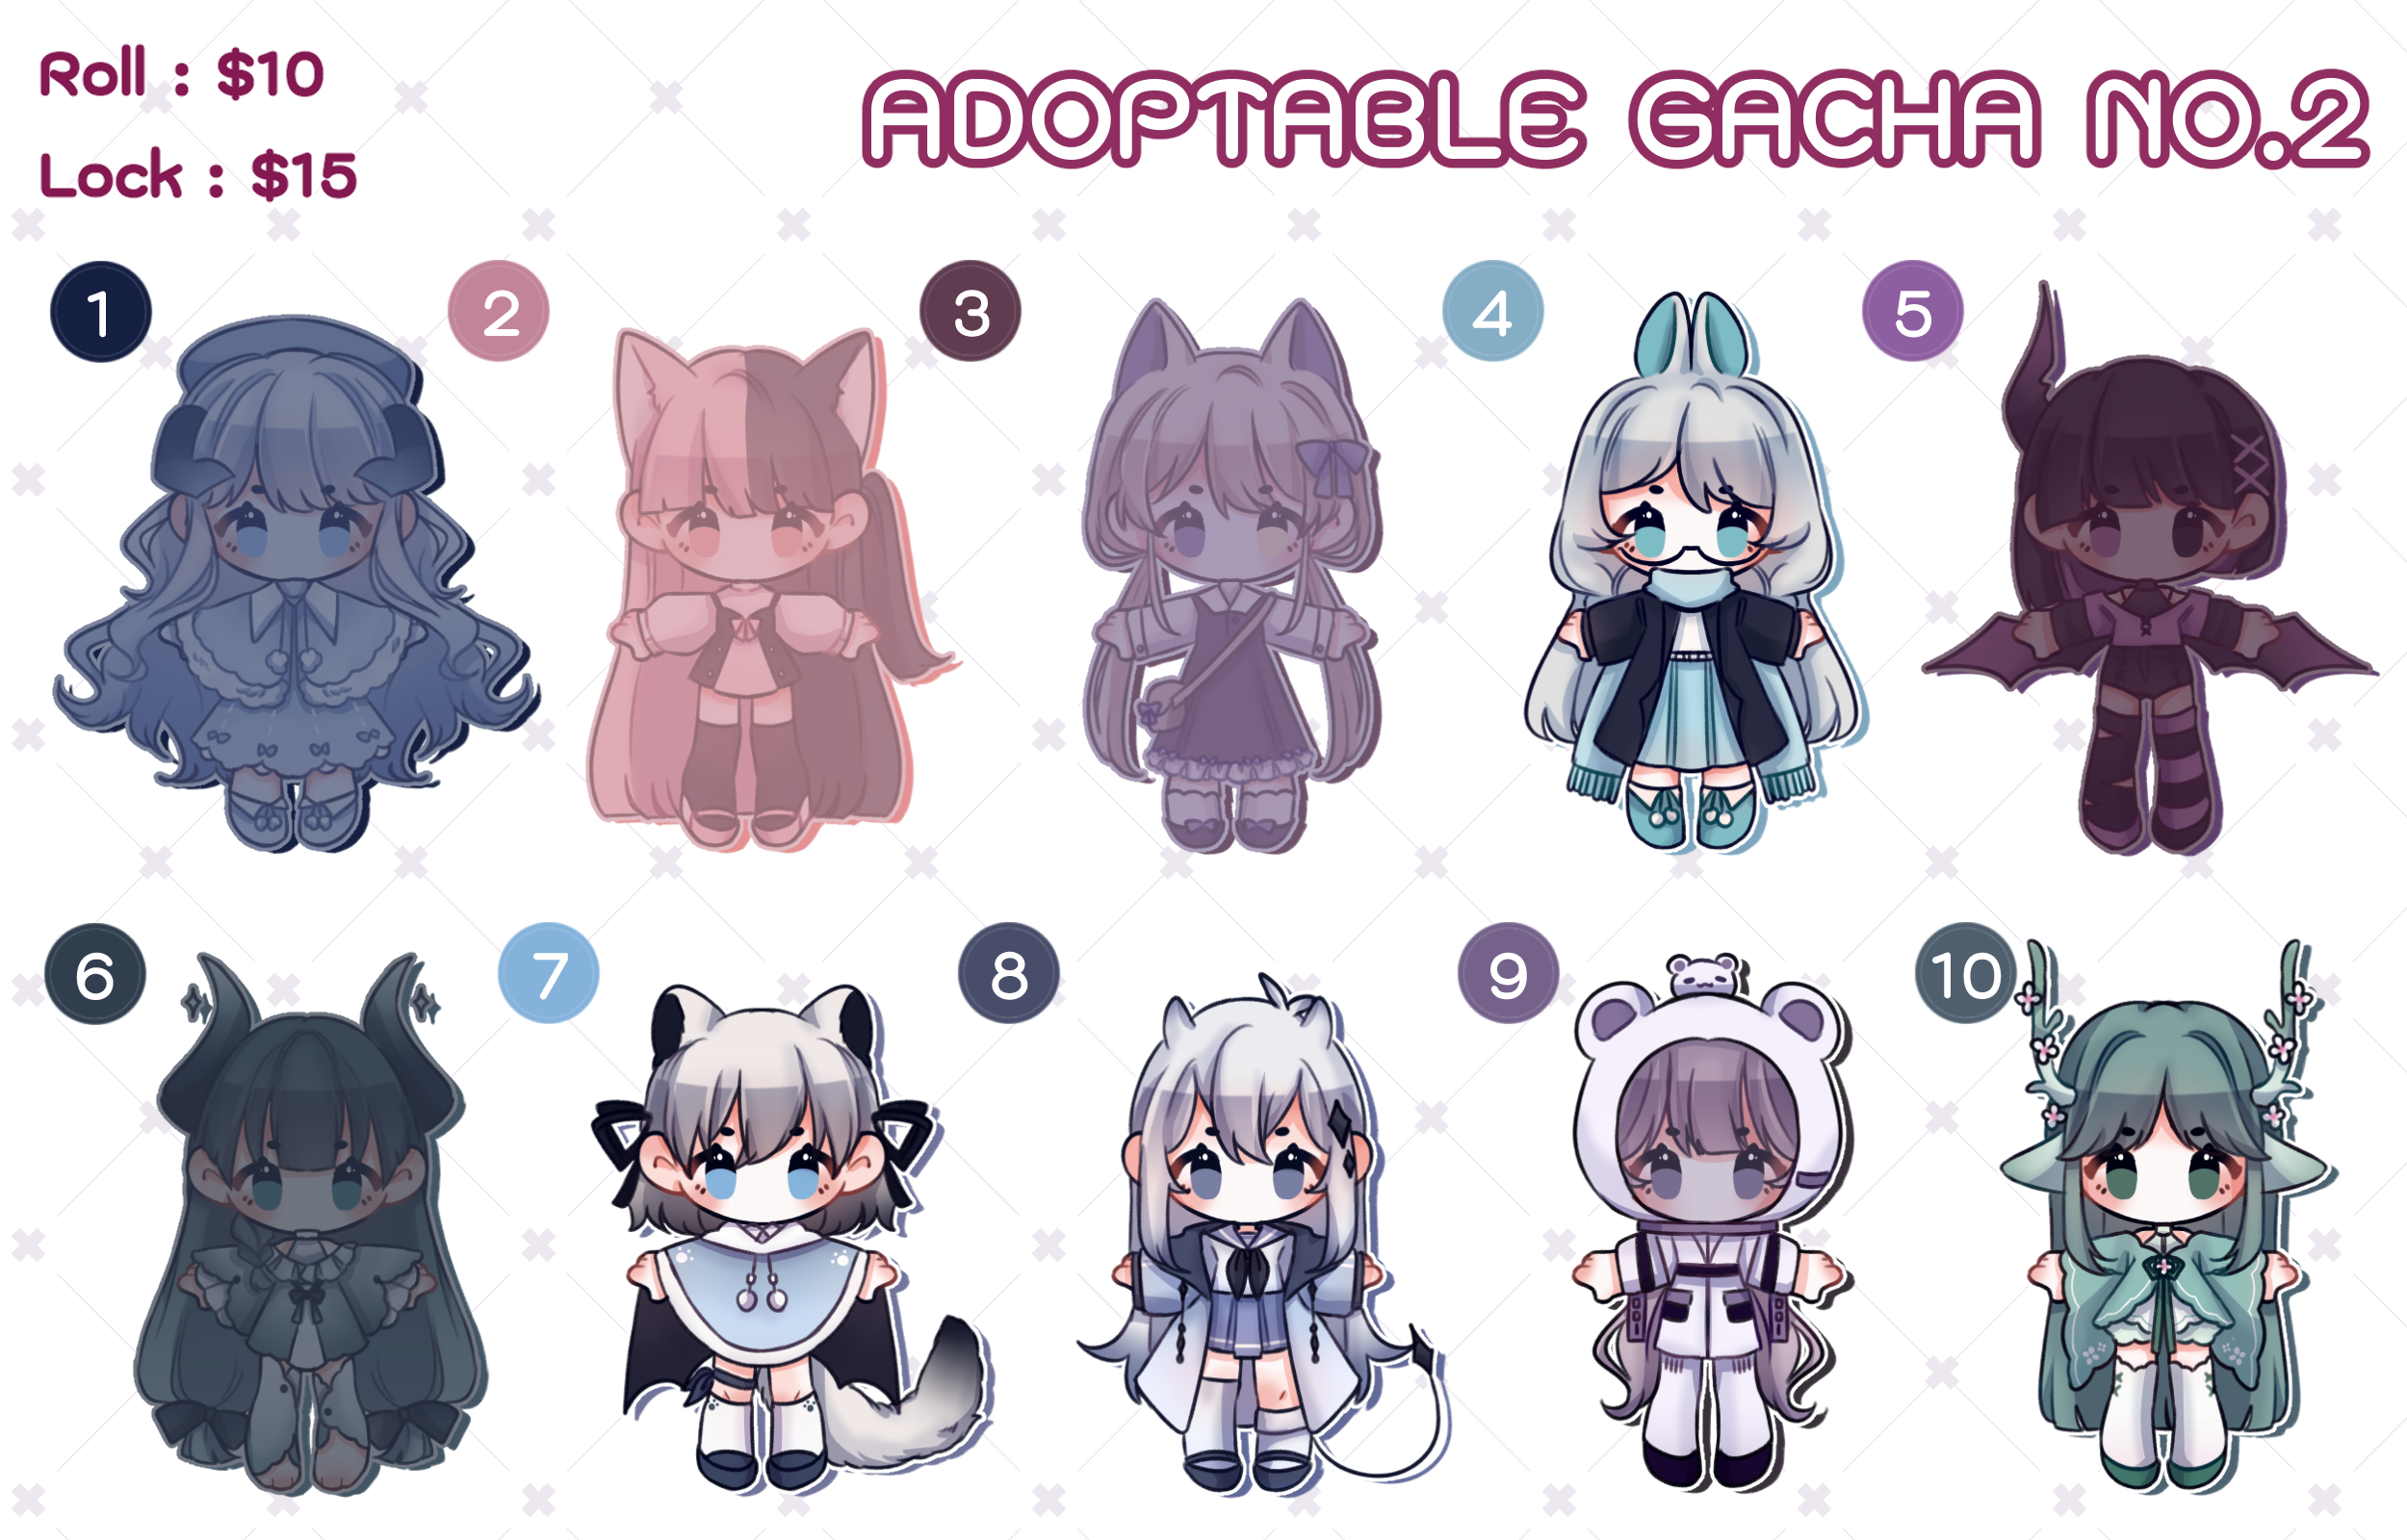 ﾟ+.ꜱʟᴇᴇᴘʏ ɢʜᴏꜱᴛ ꜰʀɪᴇɴᴅ+..｡*' on X: ୨୧˚First Adoptable Gacha oc! ୨୧˚How to  get: Just comment that you want it and I'll give you the export code!  ୨୧˚PLEASE DO NOT POST/USE AS YOUR OWN